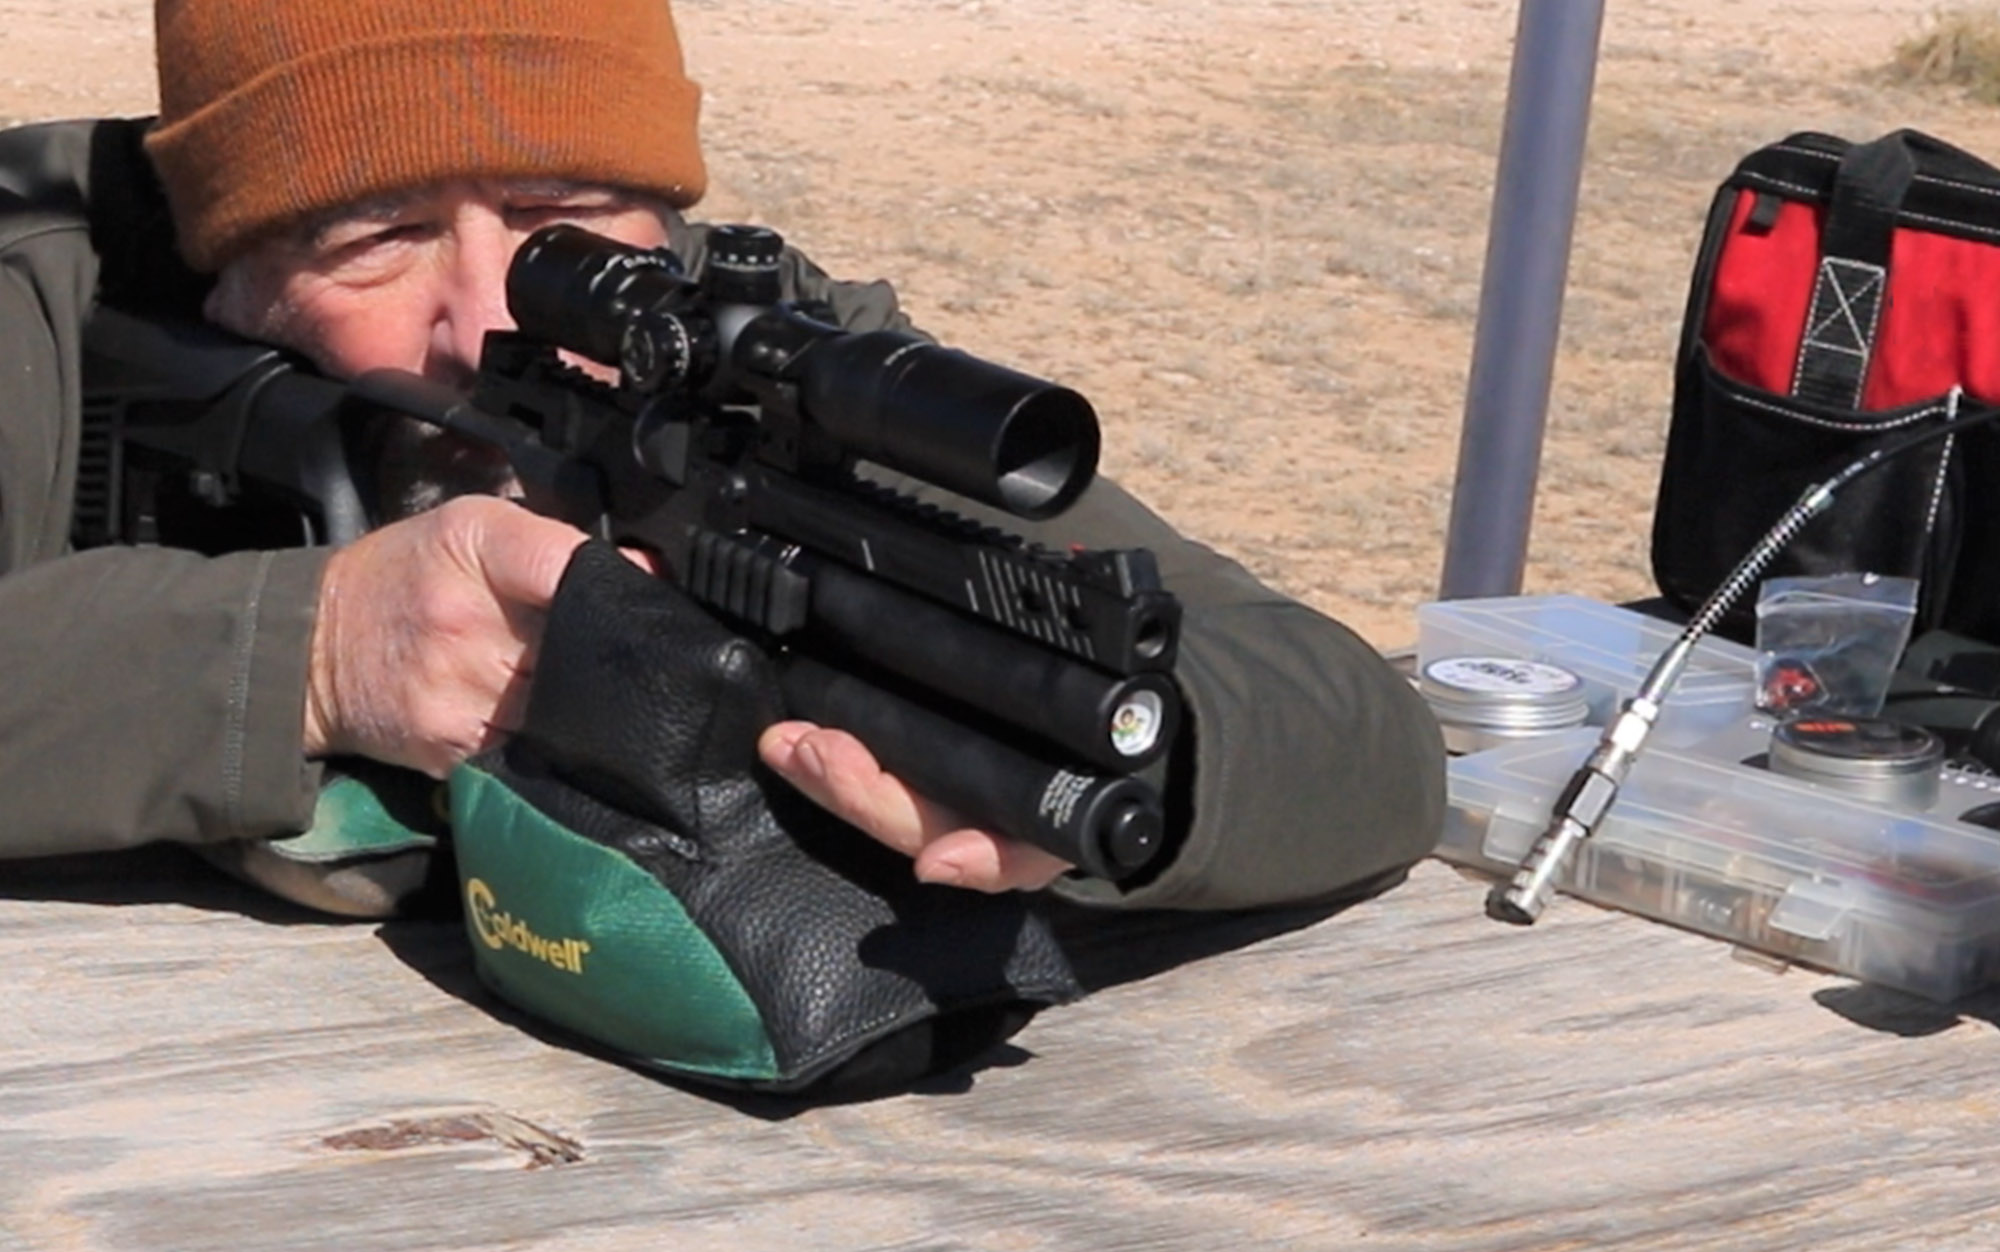 Author shoots the Jet II at the range.